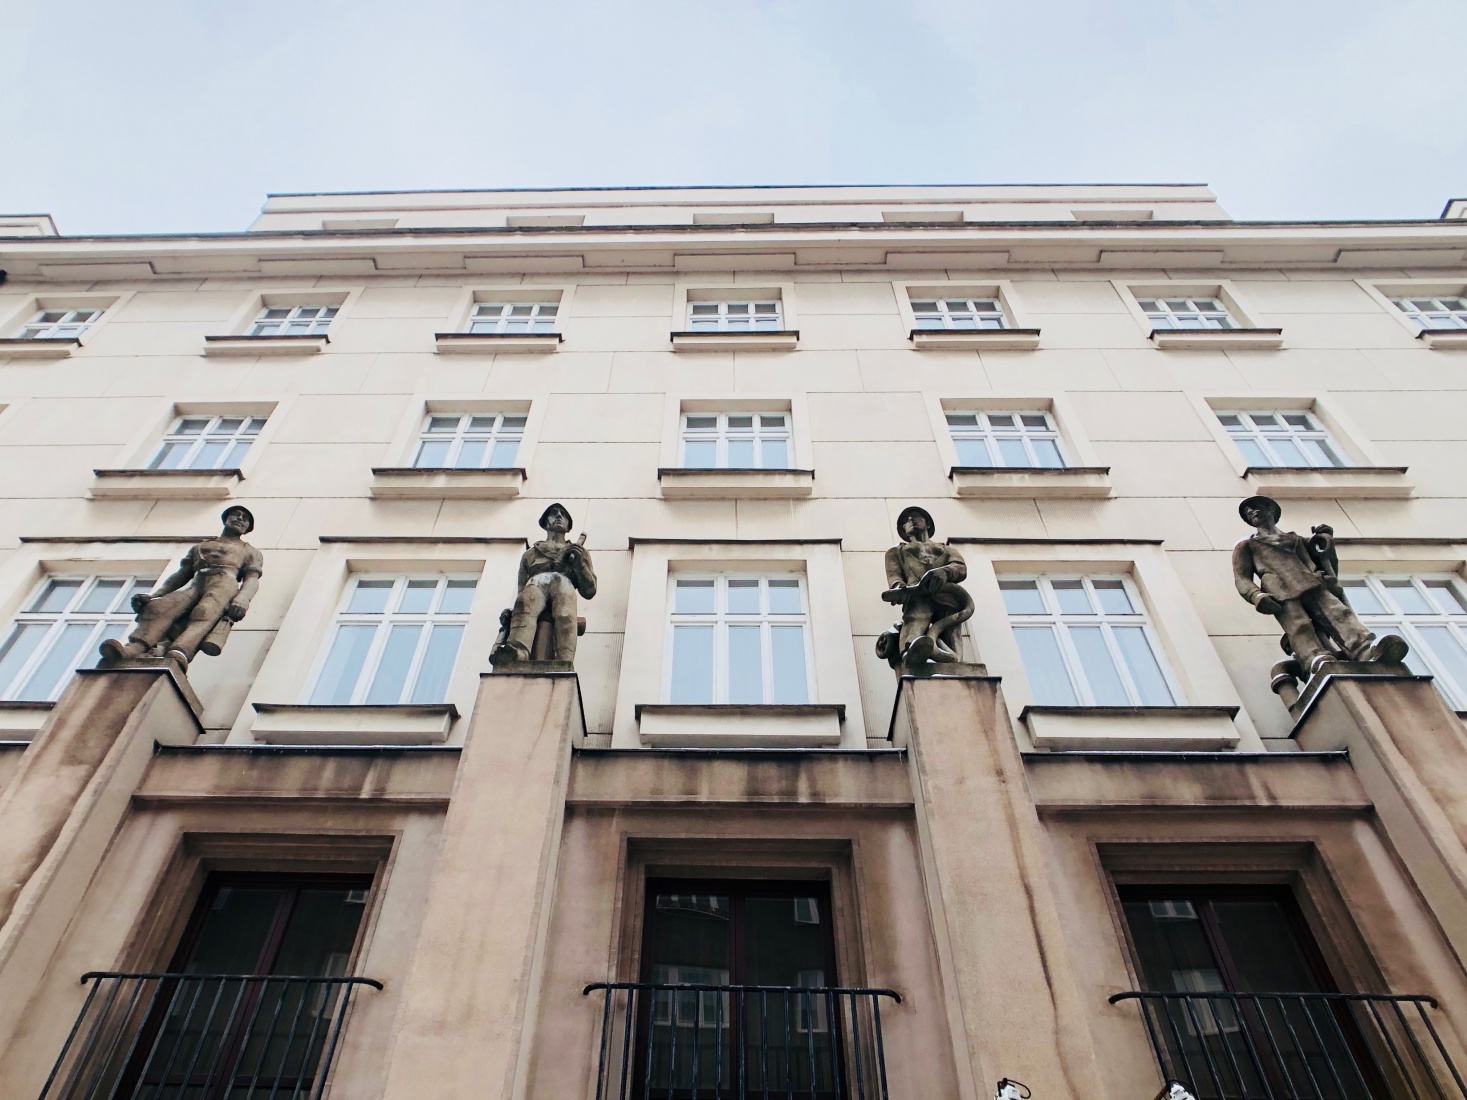 Details of a building with minimal adornments, statues of WWI soldiers are the most decoration on the building, as was common in newly-democratic Czechoslovakia post World War I. Ostrava, Czech Republic.